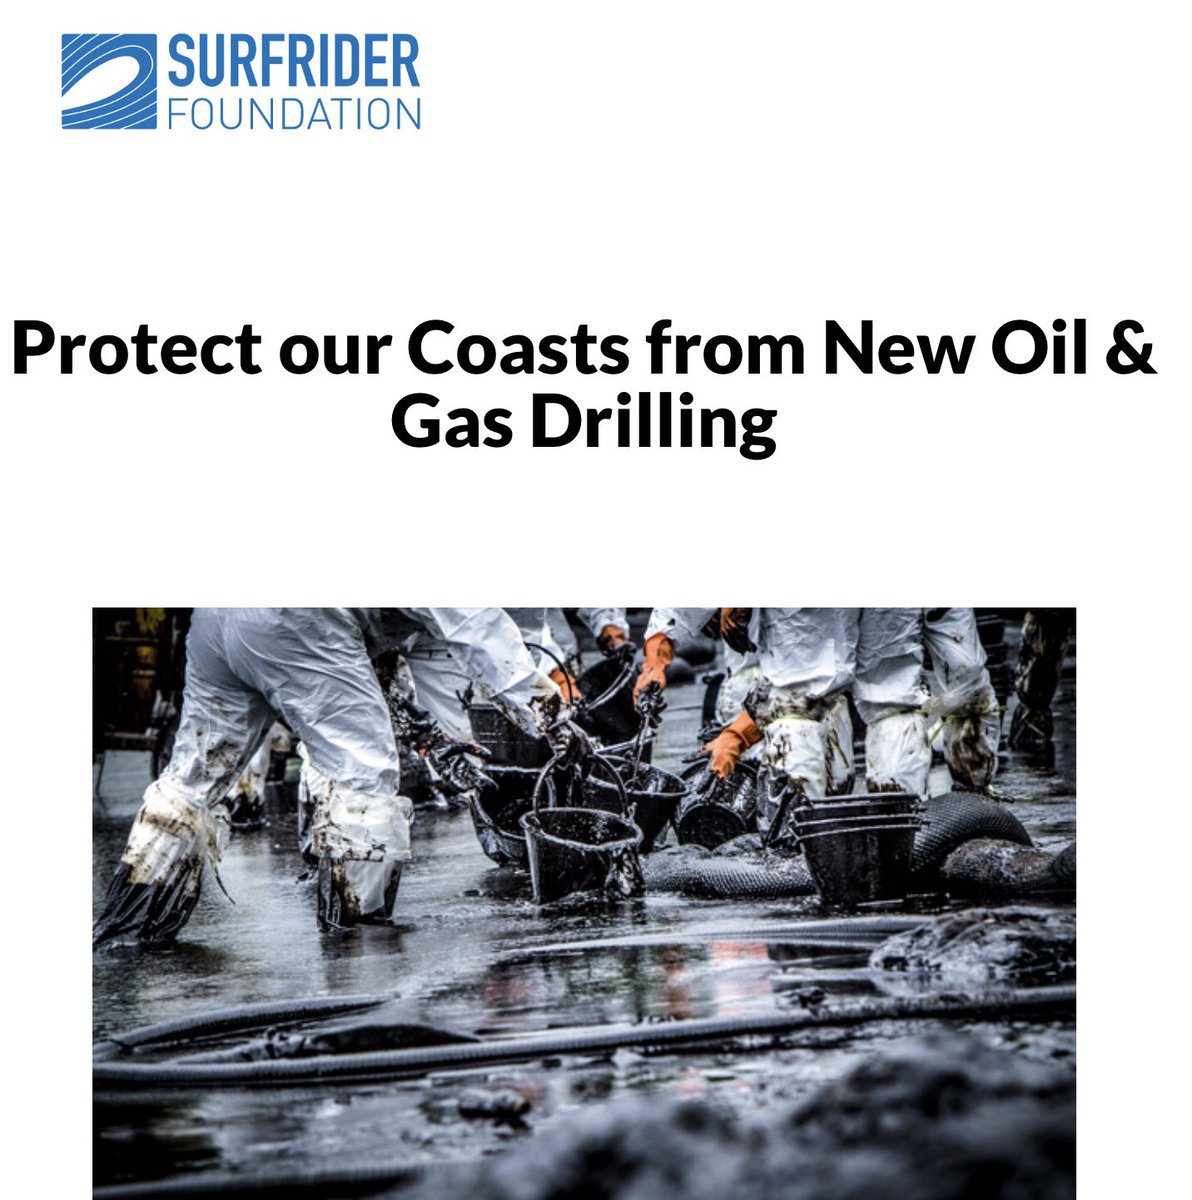 Ask Congress to #ProtectOurCoasts and ocean from new oil and gas drilling. Help support today!
nwmd.io/s/twitter/ZxE8…